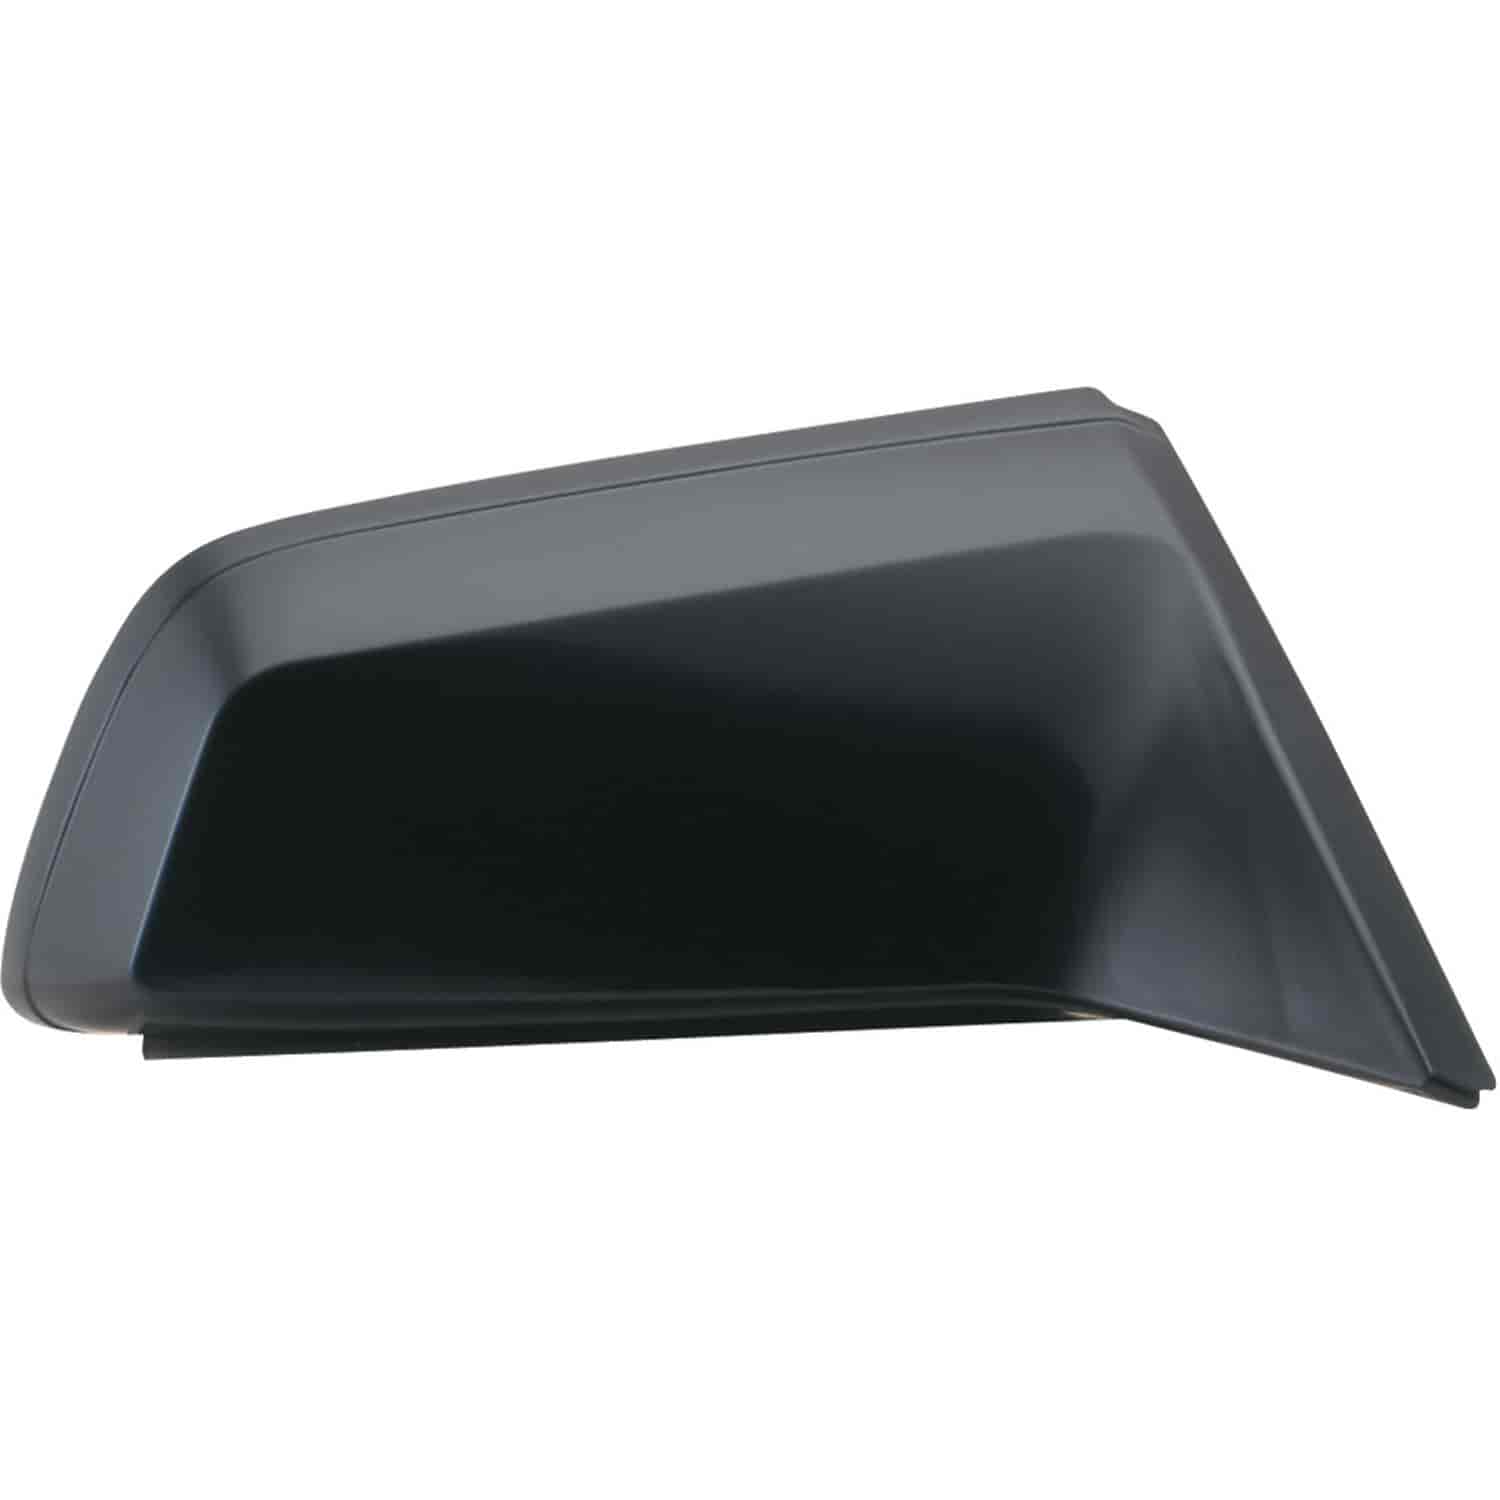 OEM Style Replacement mirror for 82-96 Buick Century/ Olds. Cutlass Ciera 82-90 Chevy Celebrity Spor